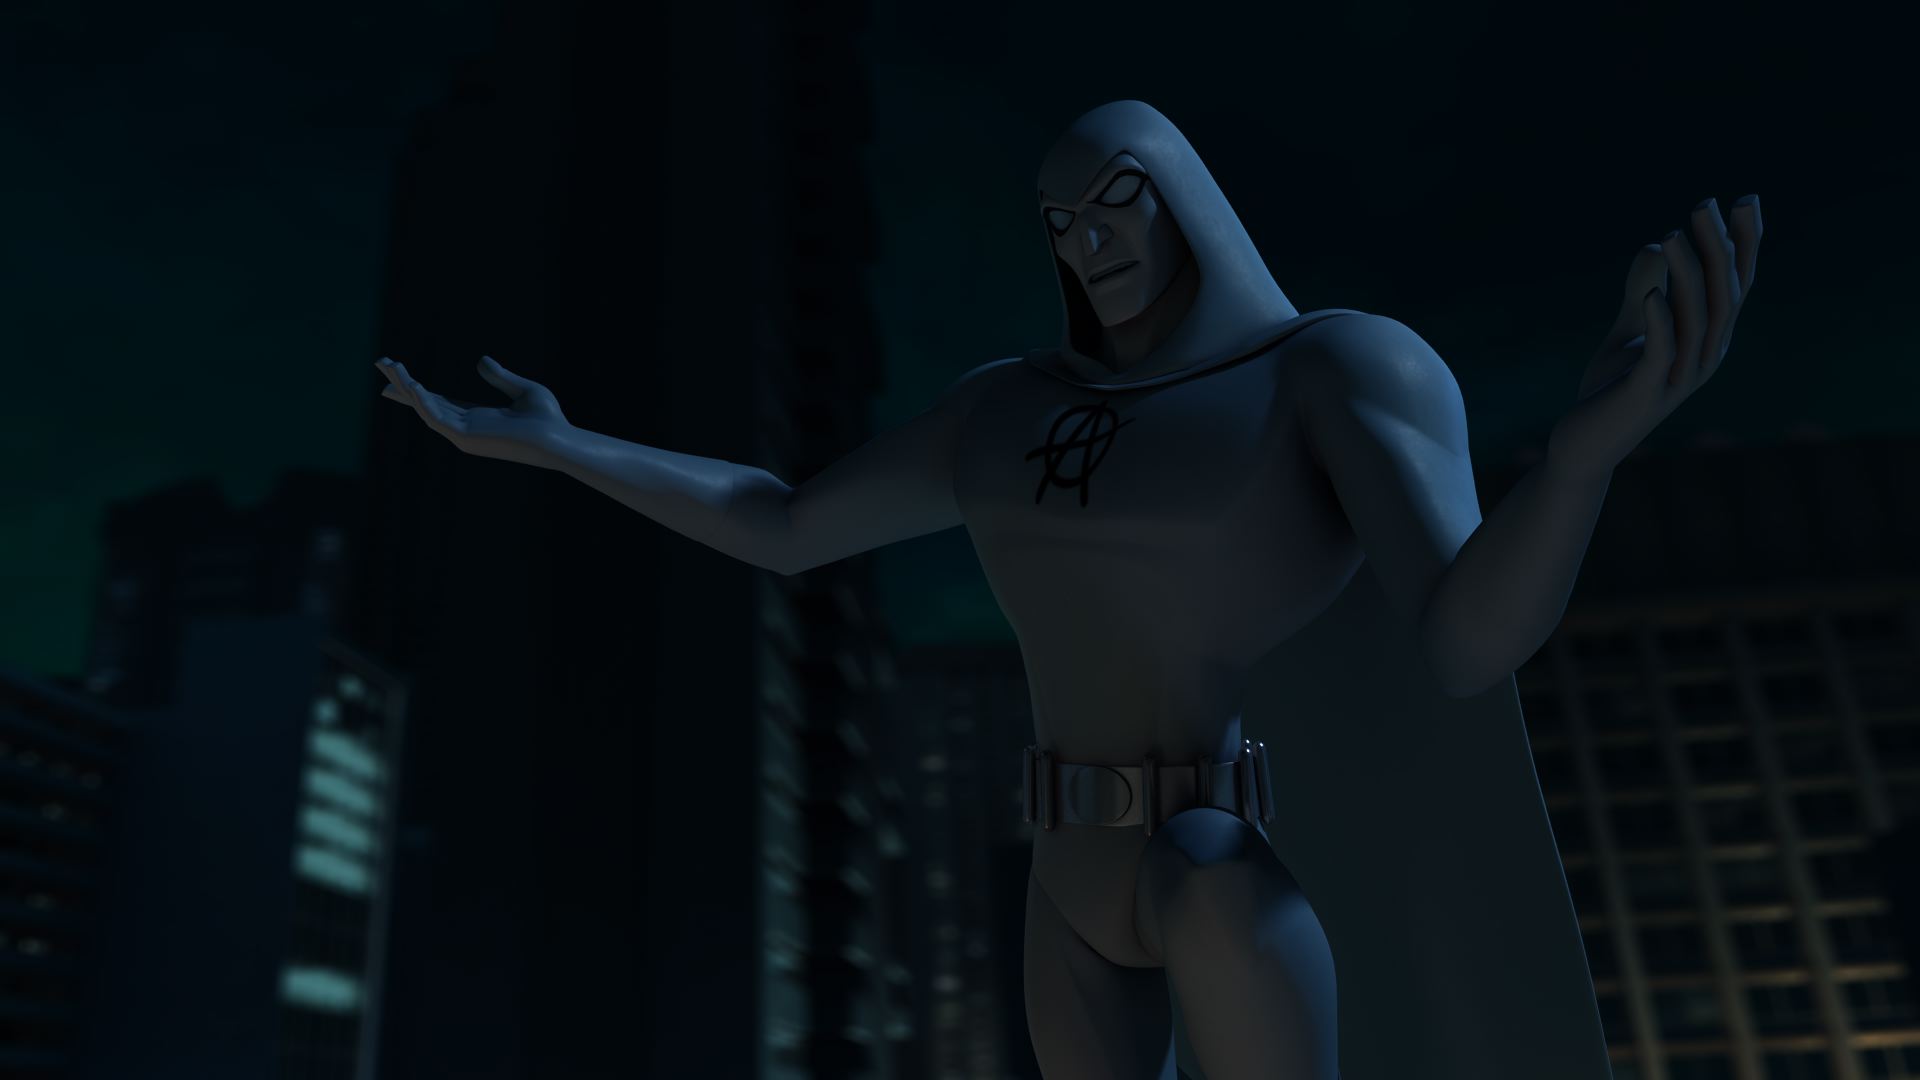 Re Beware The Batman Tests Introduce A Little Anarchy